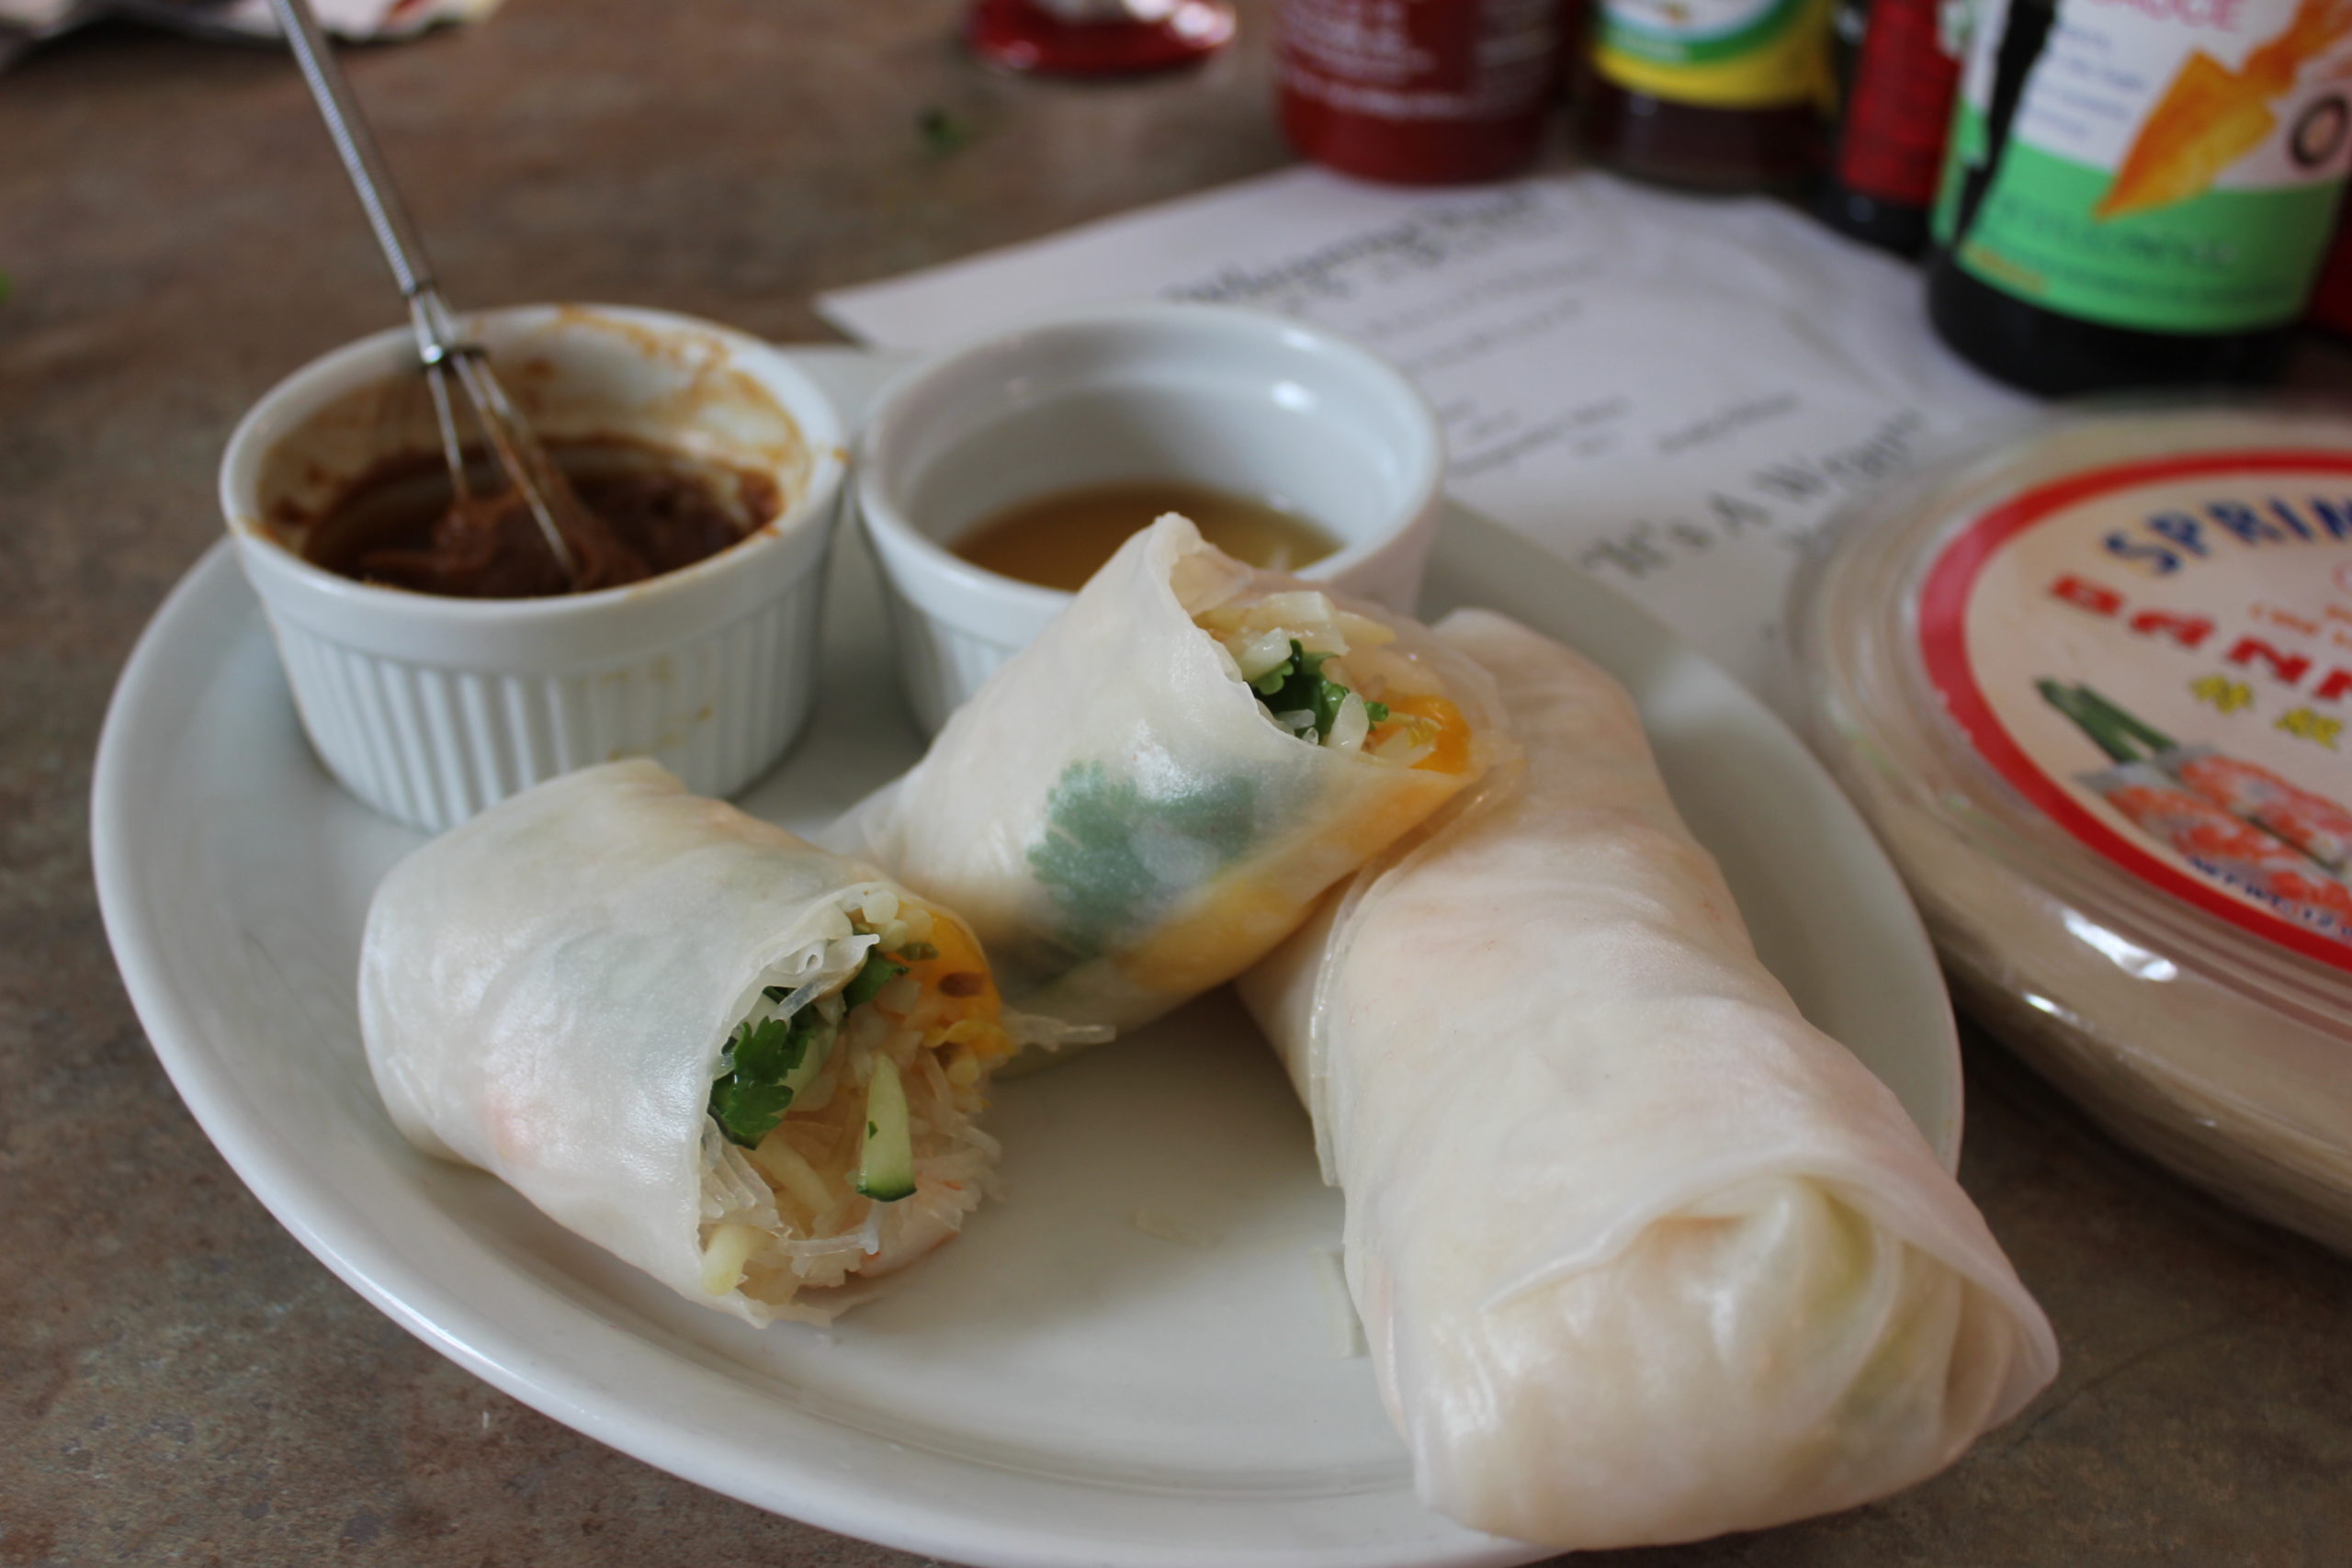 Thai Spring Rolls with dipping sauce and ingredients